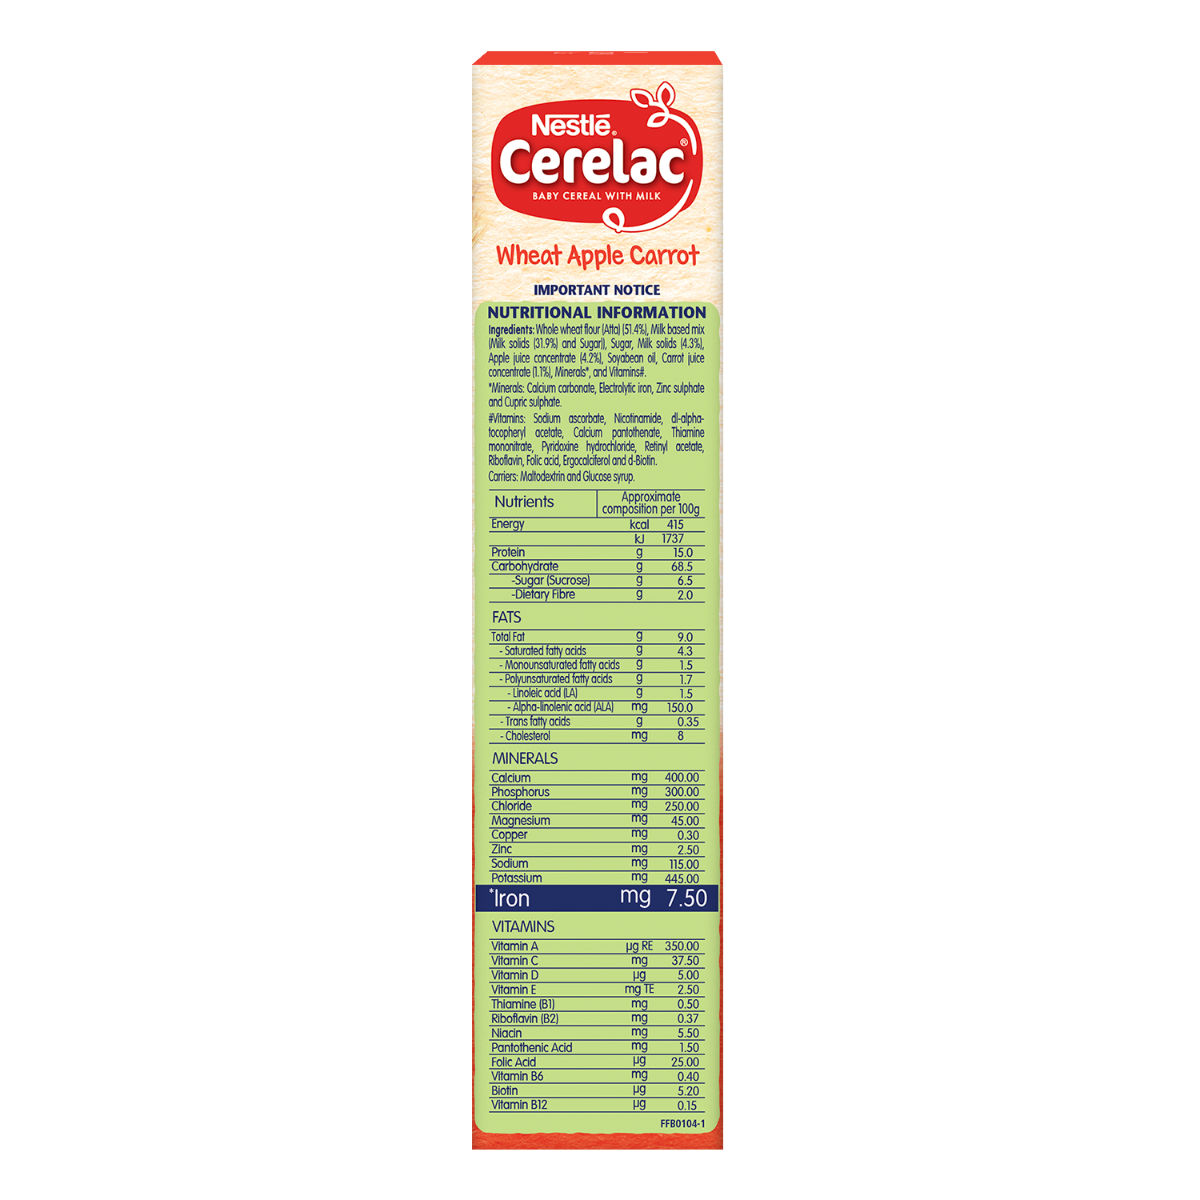 Nestle Cerelac Baby Cereal with Milk Apple Carrot (From 6 to 24 Months) Powder, 300 gm Refill Pack, Pack of 1 